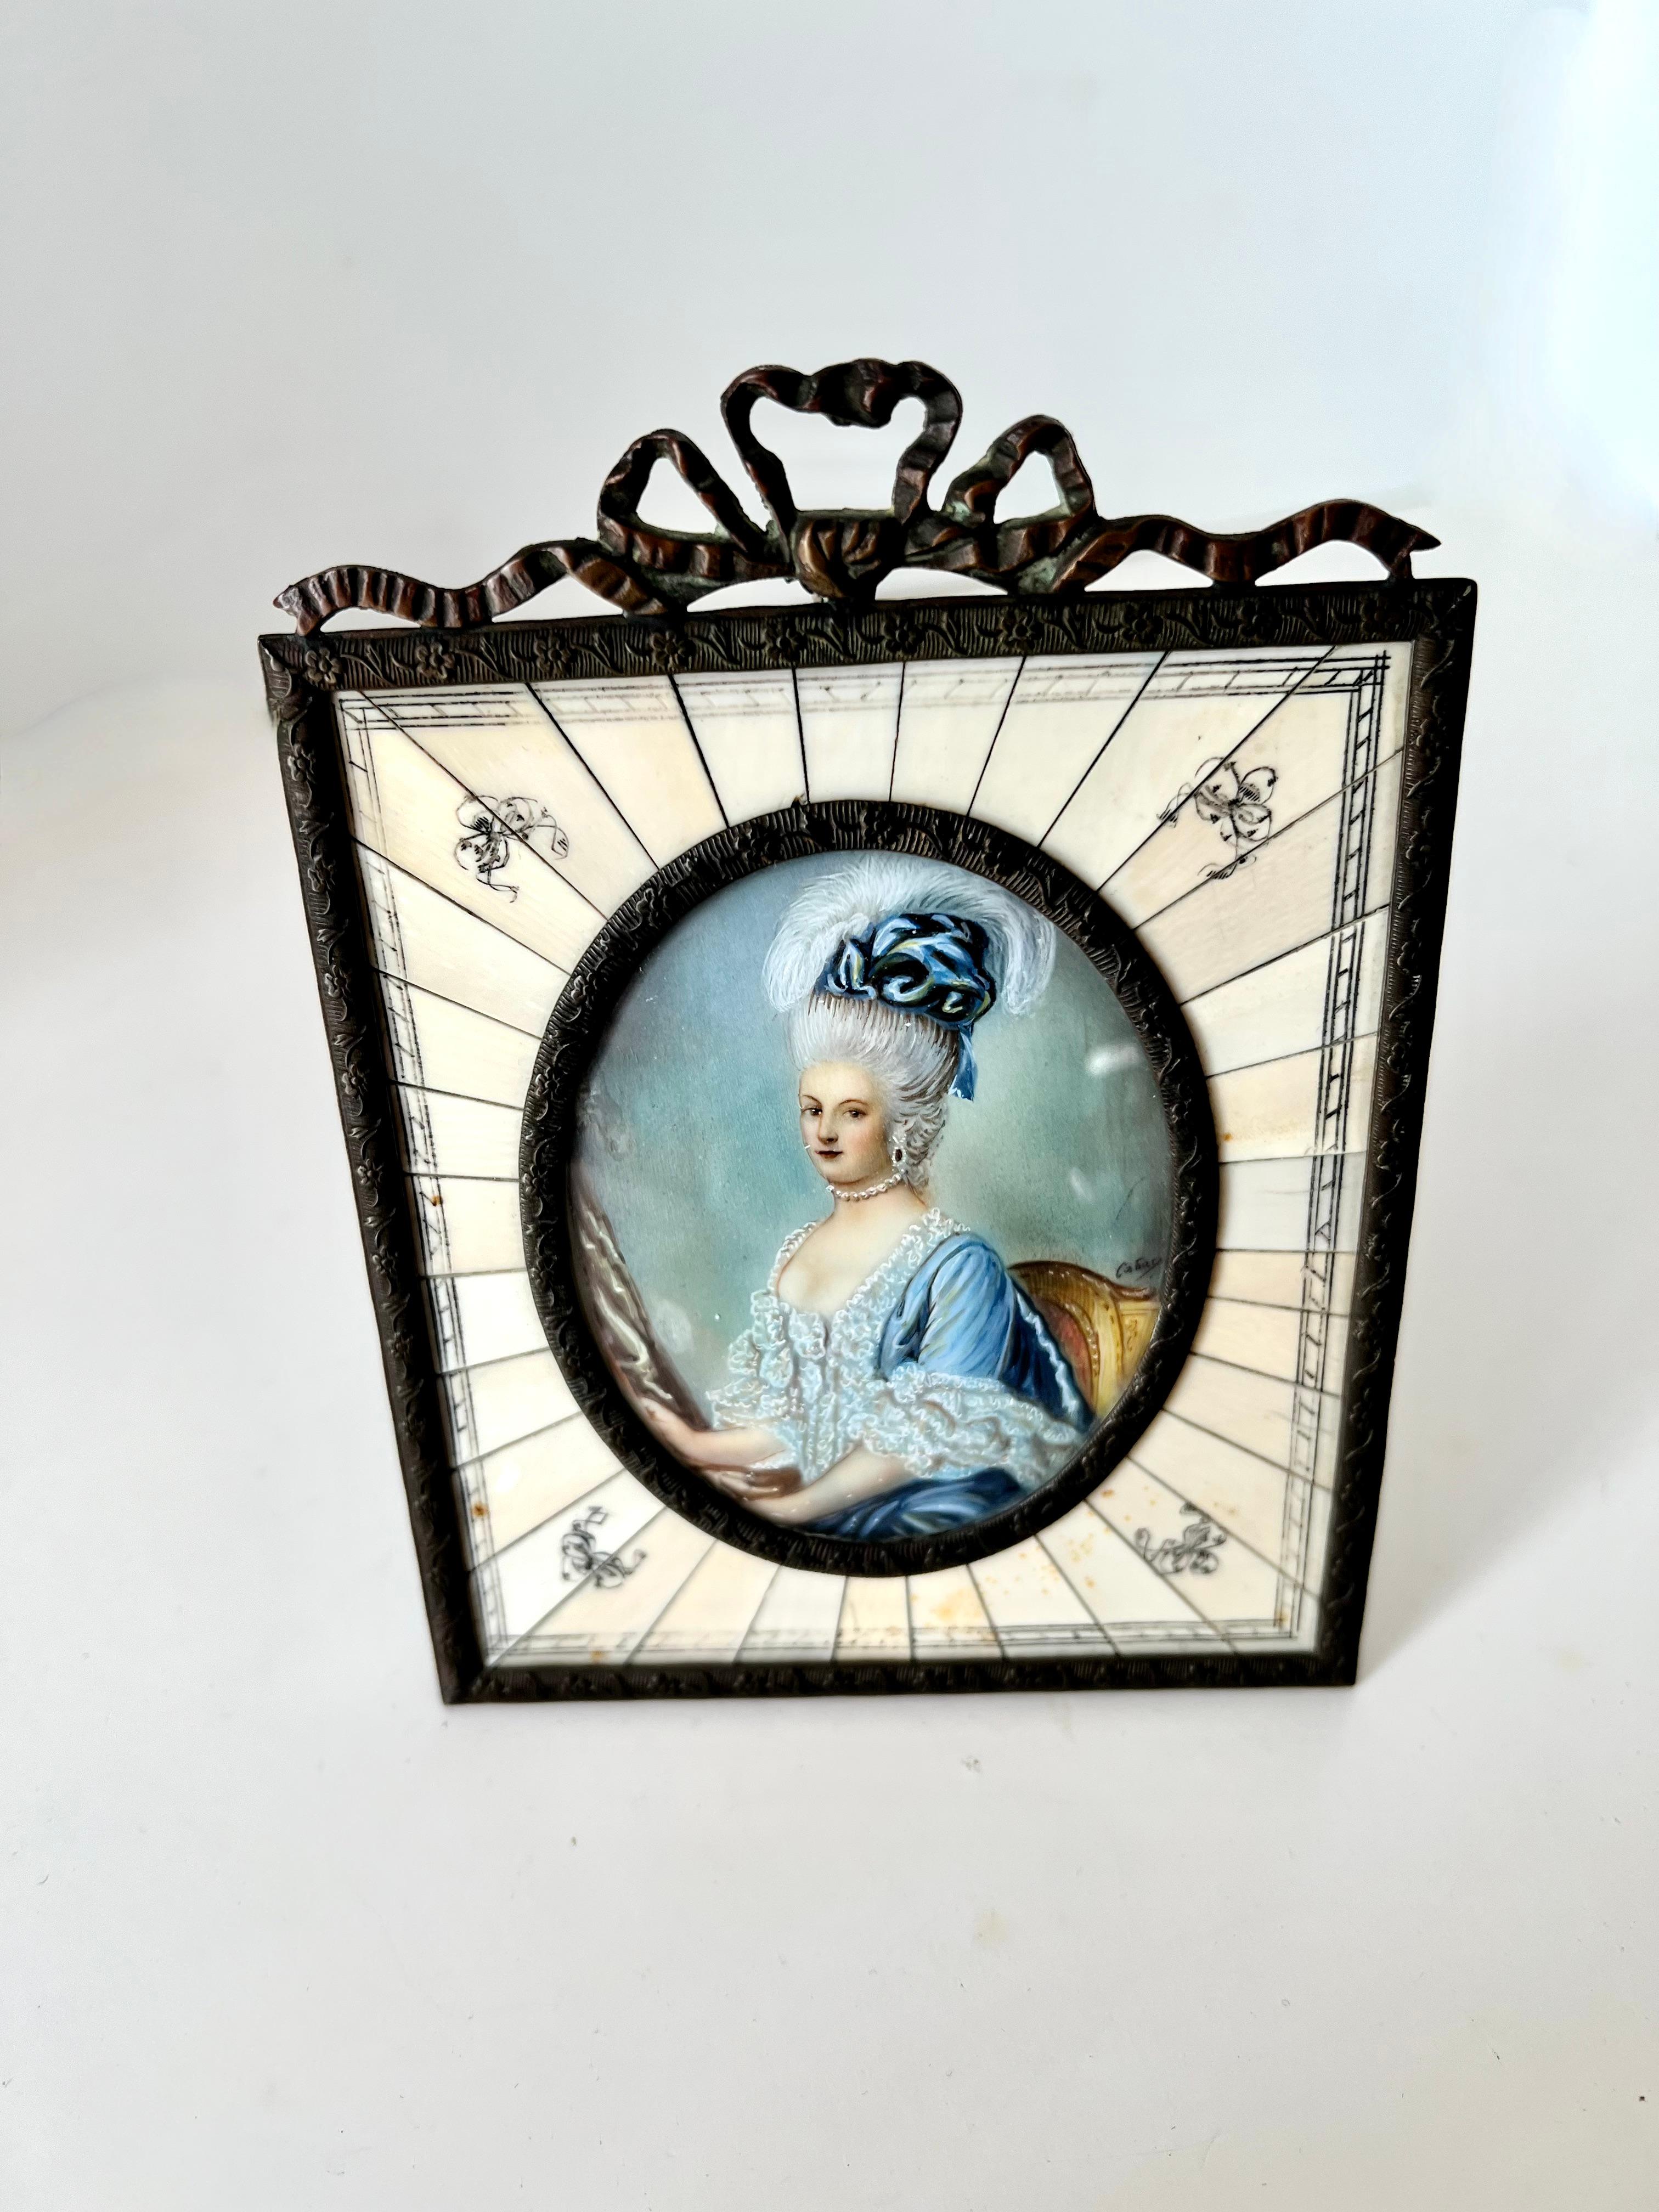 A late 19th Century hand painted mature portrait in a bone and Bronze frame with velvet backing and bronze twig like stand.  An impeccable piece and lovely on the desk or shelf.

A well crafted piece, hand made and attention to all details.  A